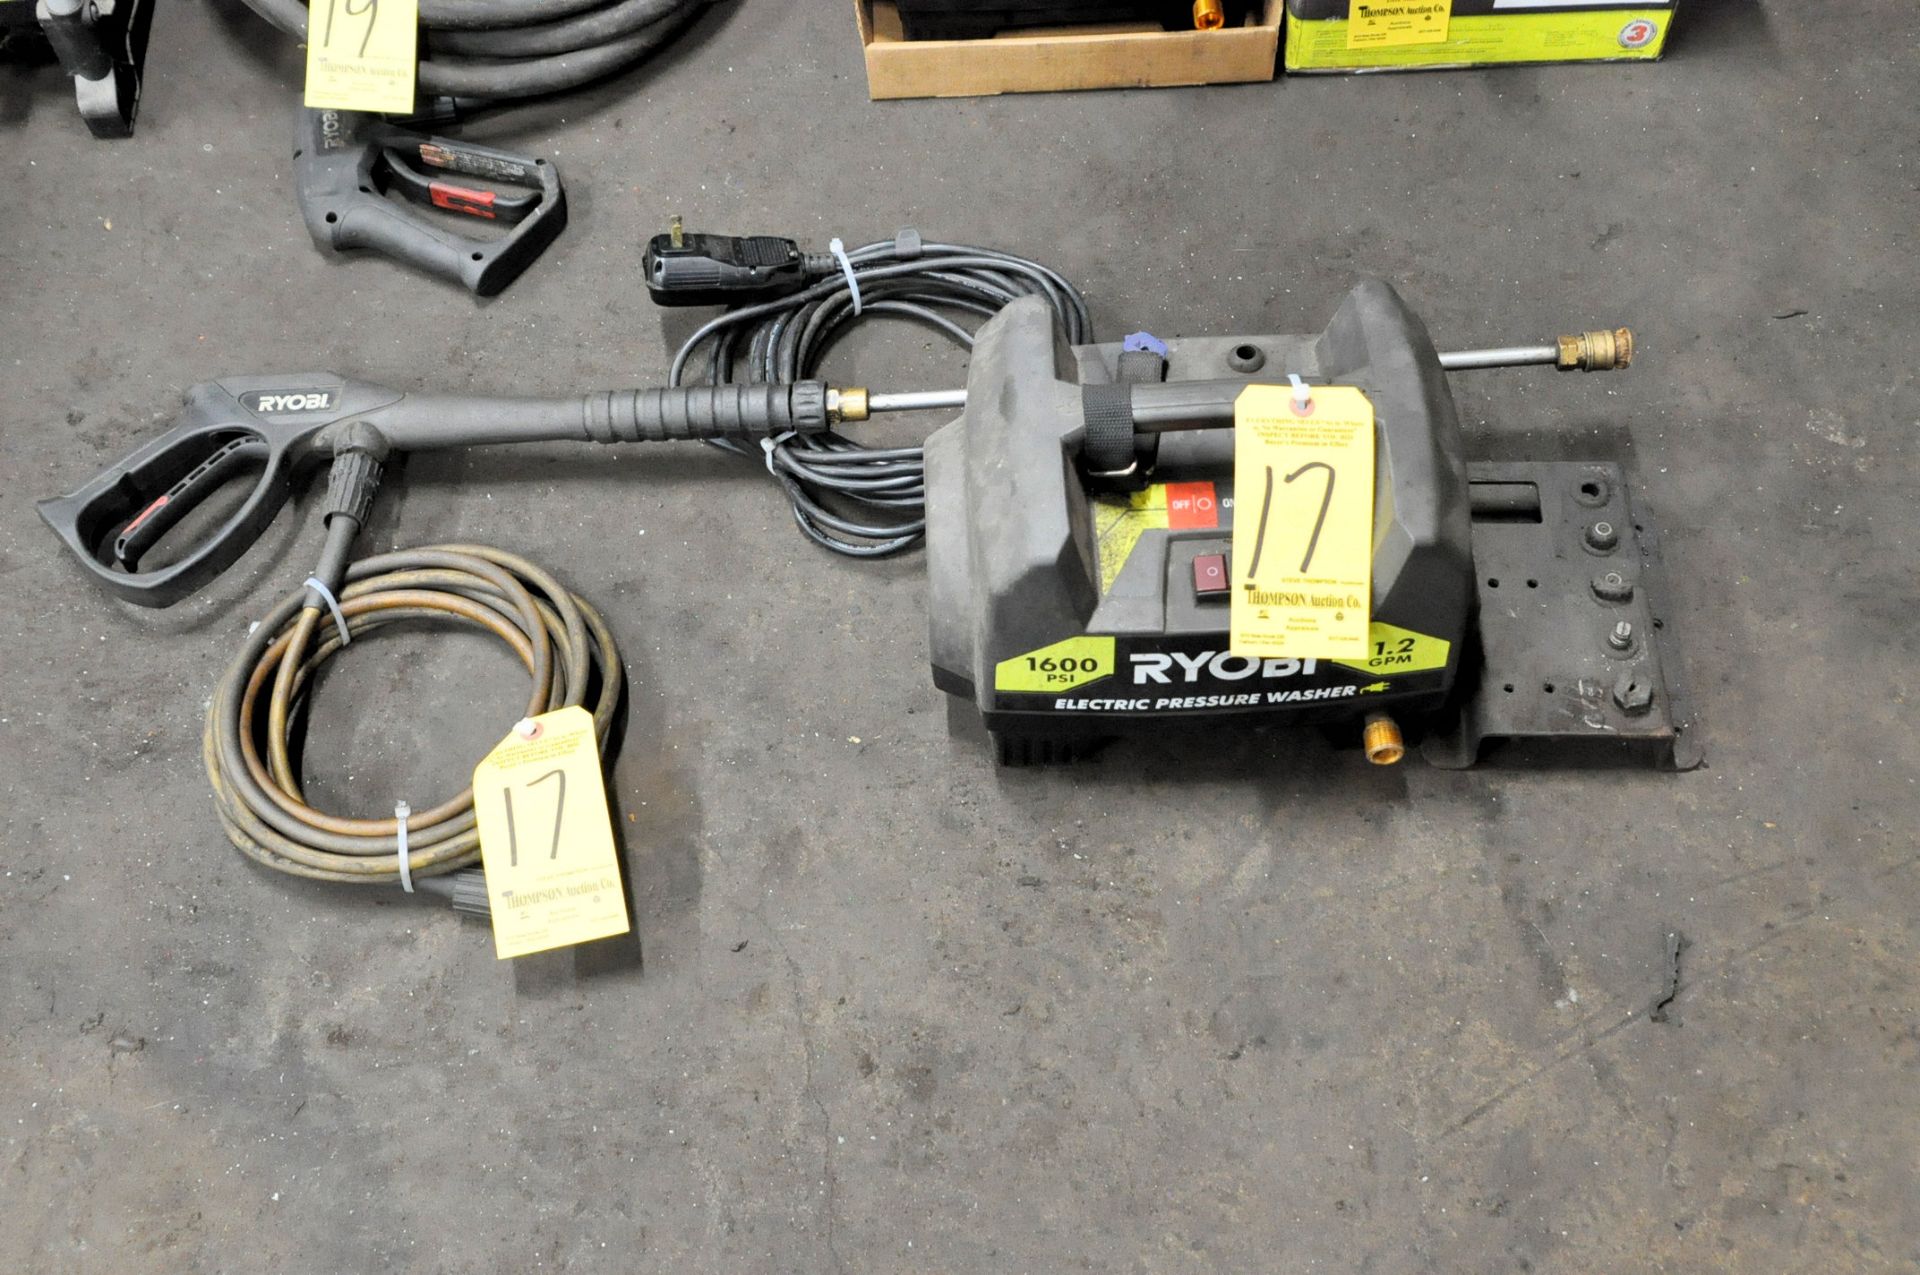 Ryobi Electric 1600 PSI Cold Water Pressure Washer with Hose and Wand